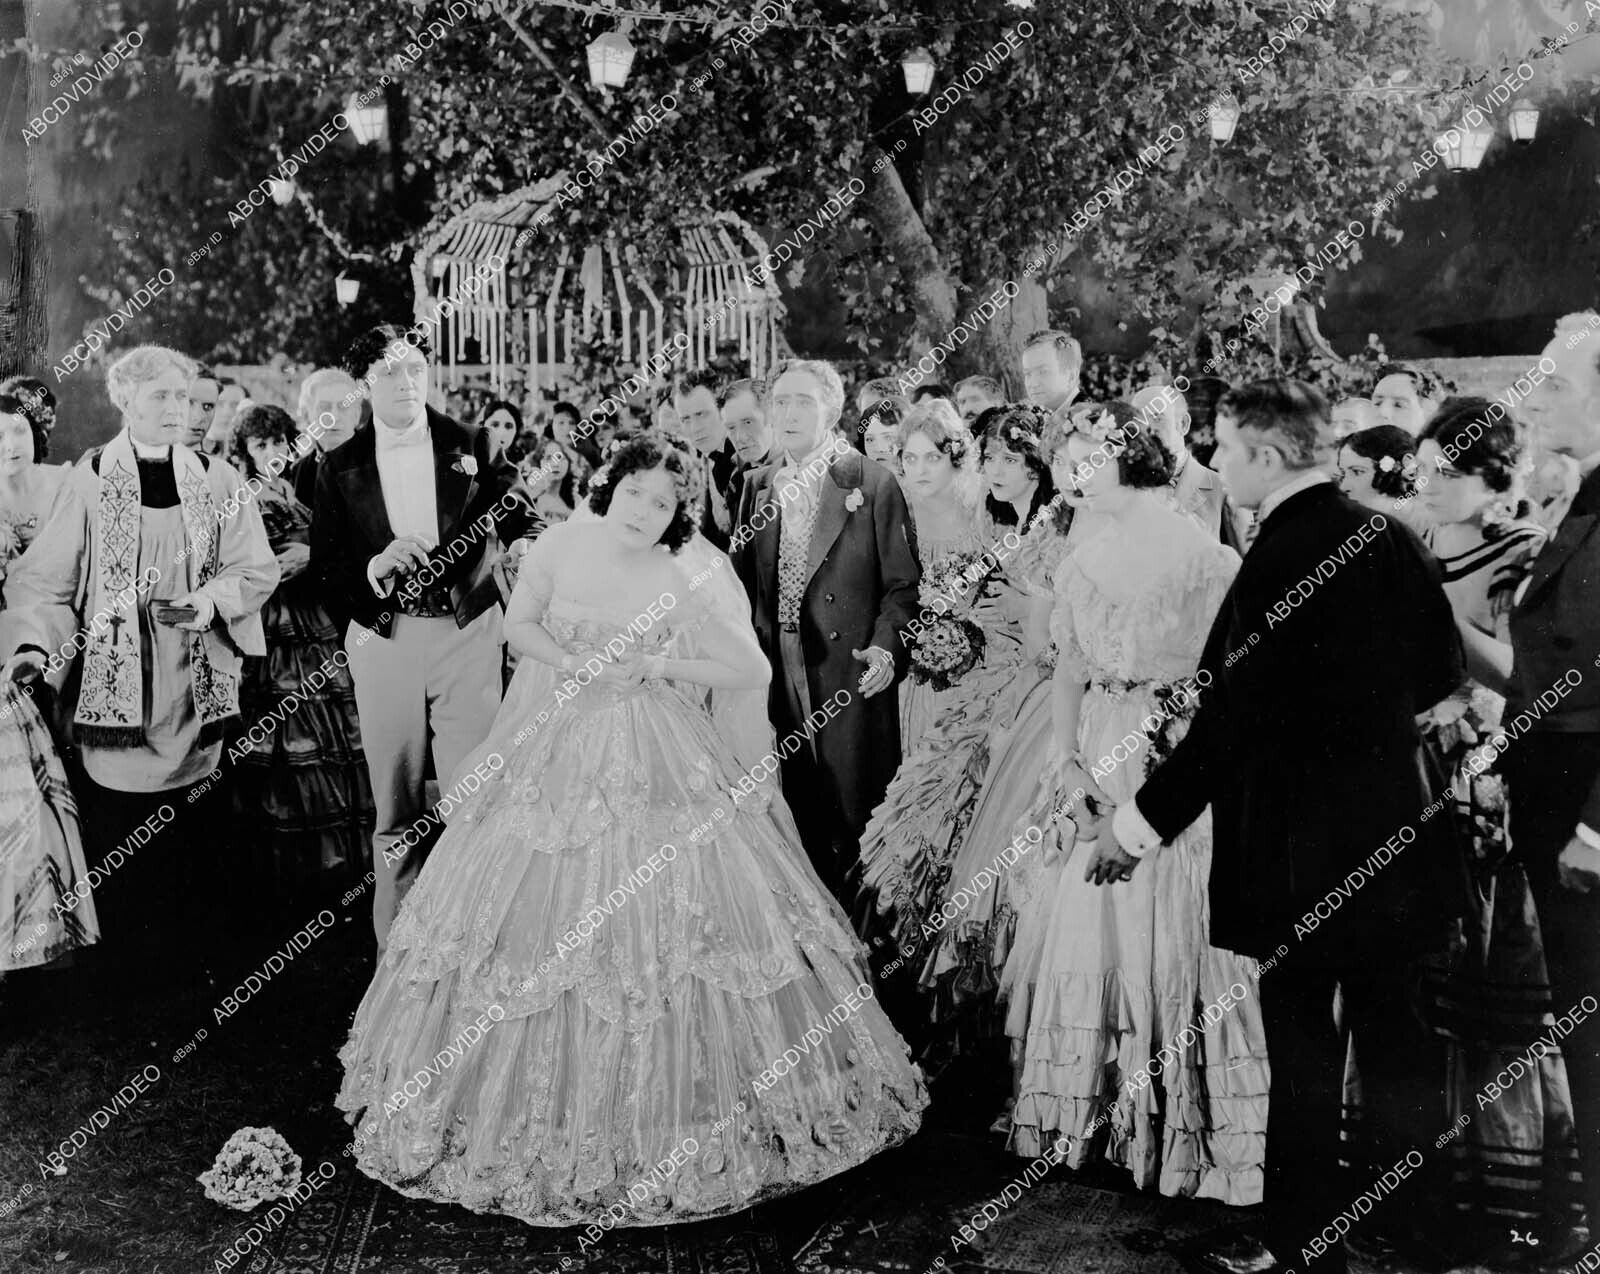 crp-55683 1922 Norma Talmadge, Harrison Ford, Wyndham Standing wedding sequence